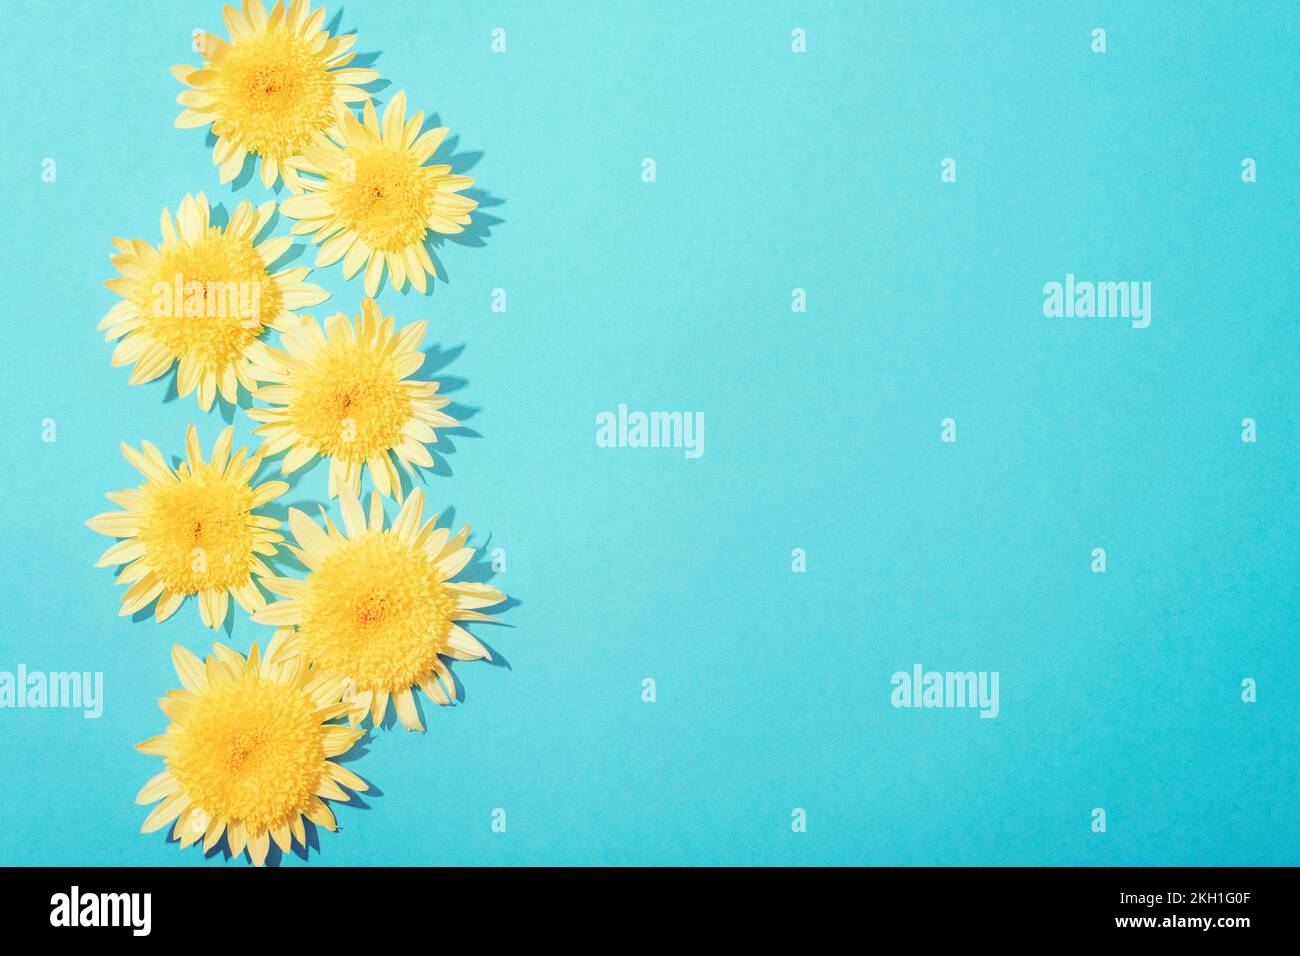 Blue festive background with yellow chrysanthemum flowers. Top view, flat lay, copy space. Stock Photo